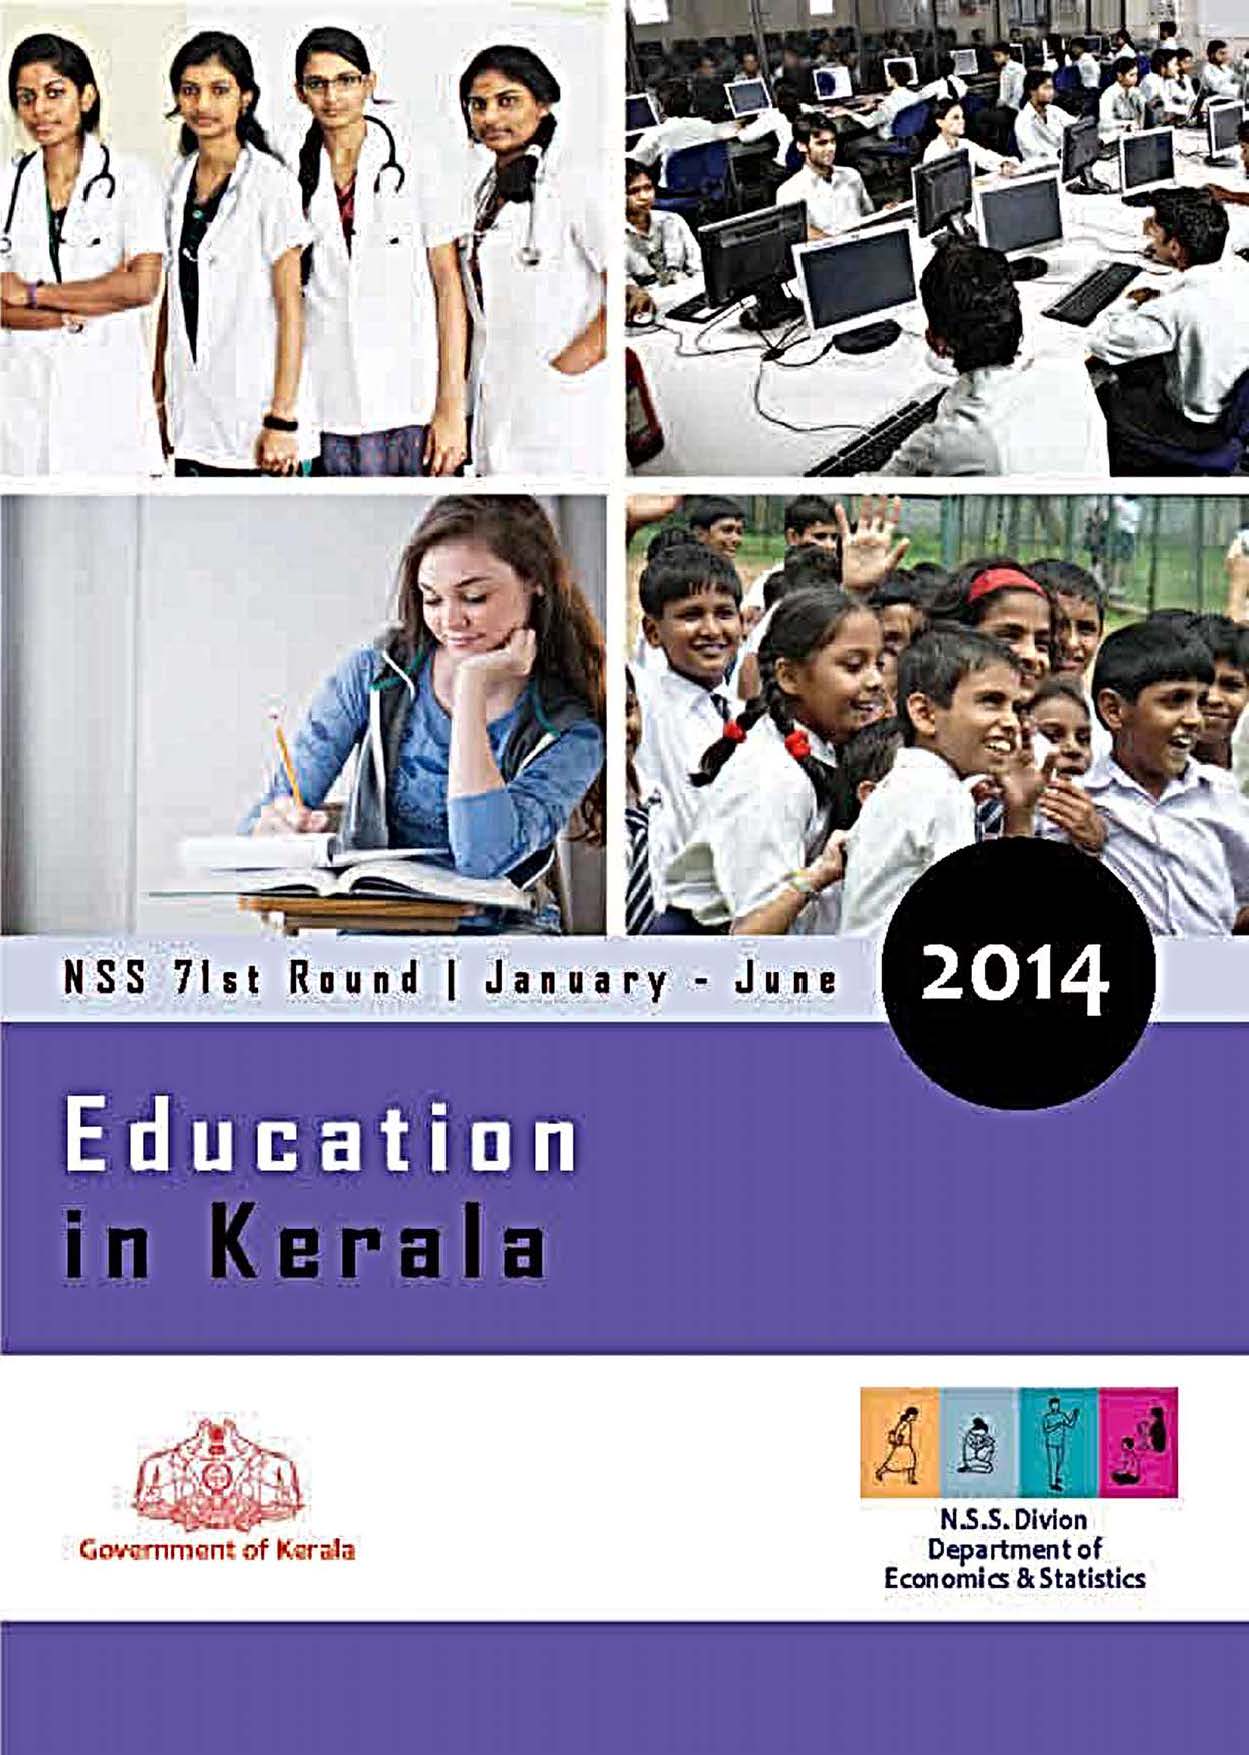 NSS 71st round - Education in Kerala 2014